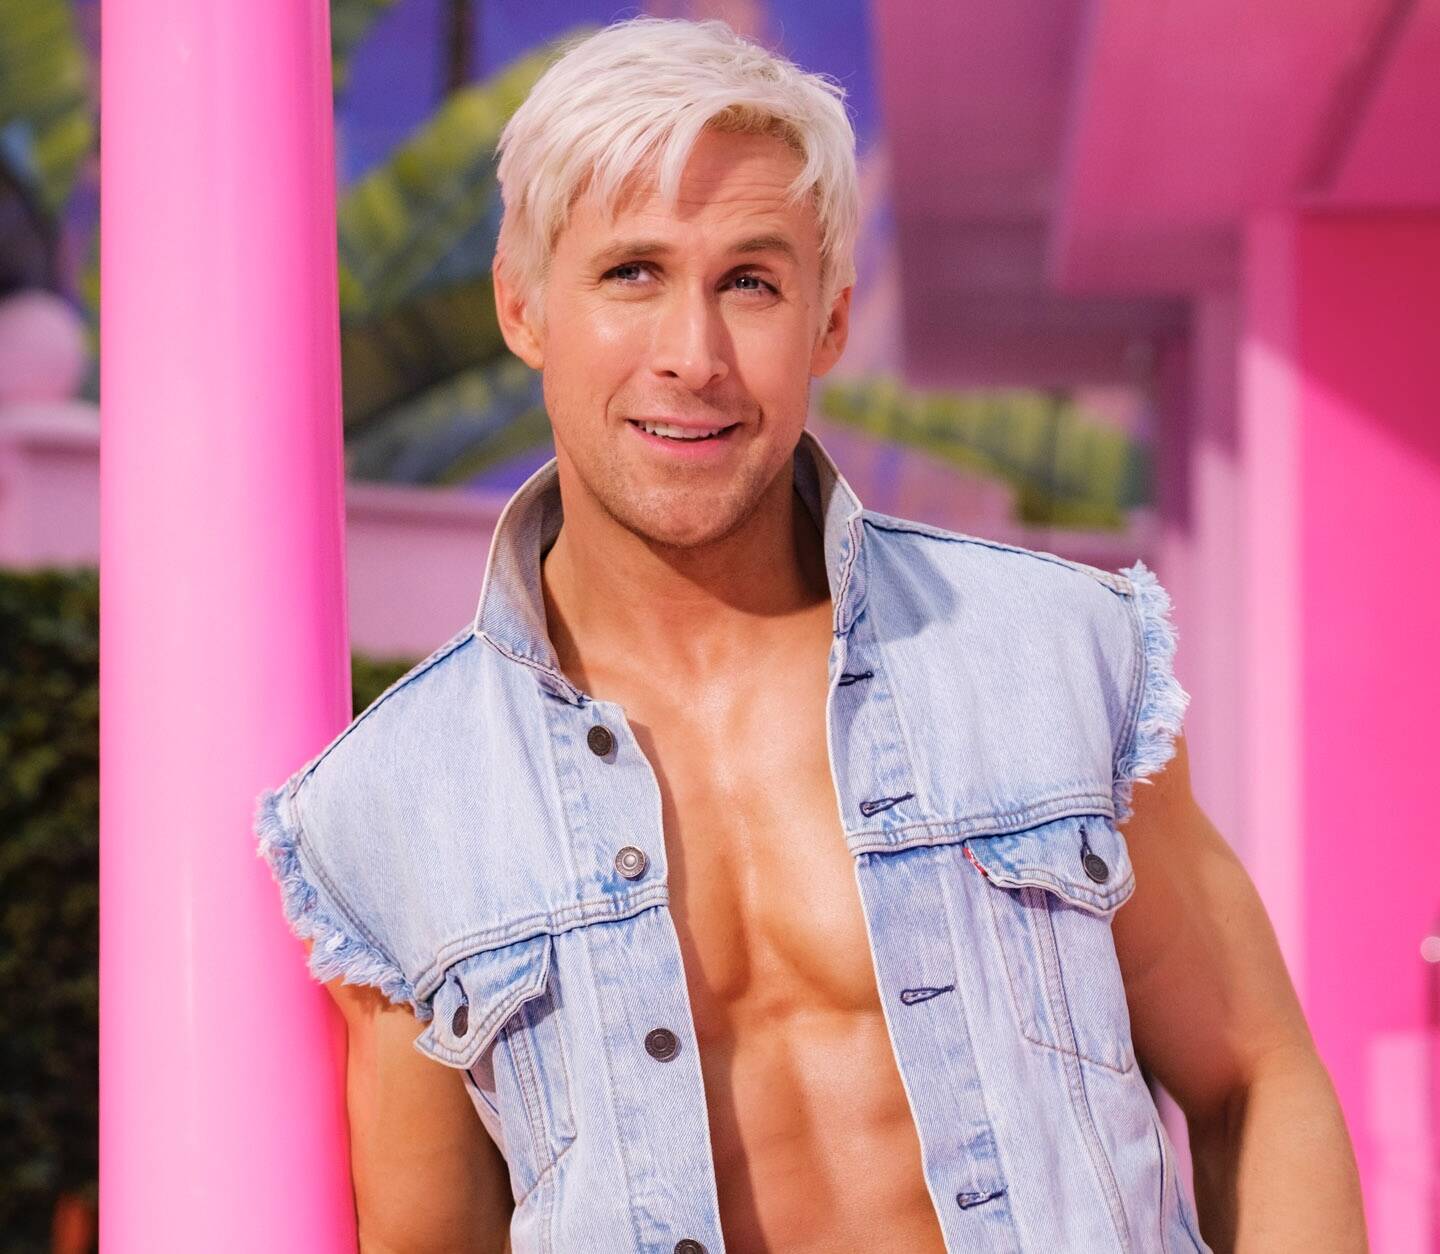 In the film, the actor will bring the iconic Ken doll to life. (Photo: Warner Bros. release)